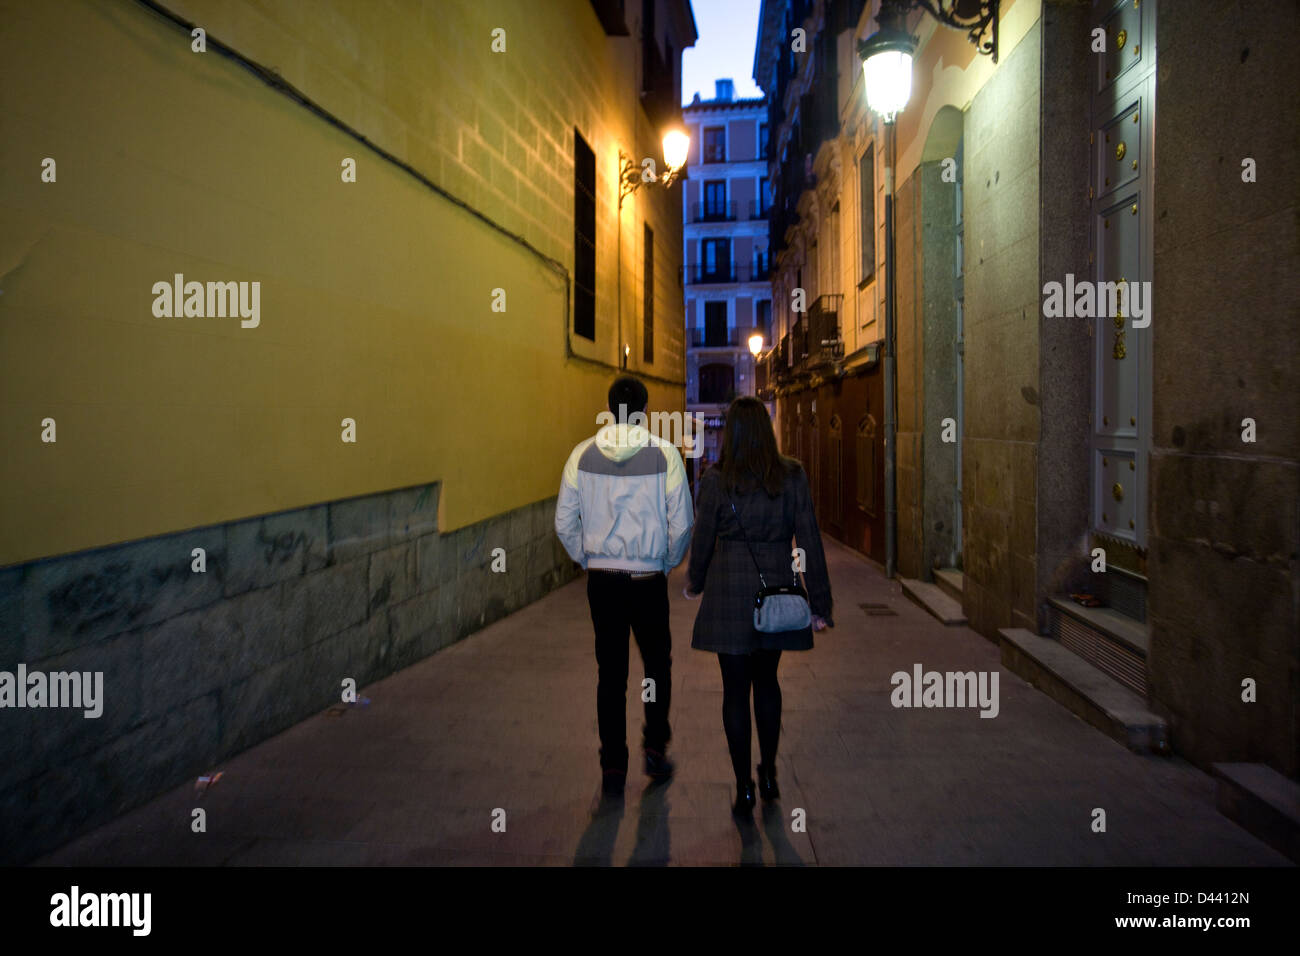 A young man and woman walk together after having enjoyed a long party night out in Madrid, Spain. Stock Photo